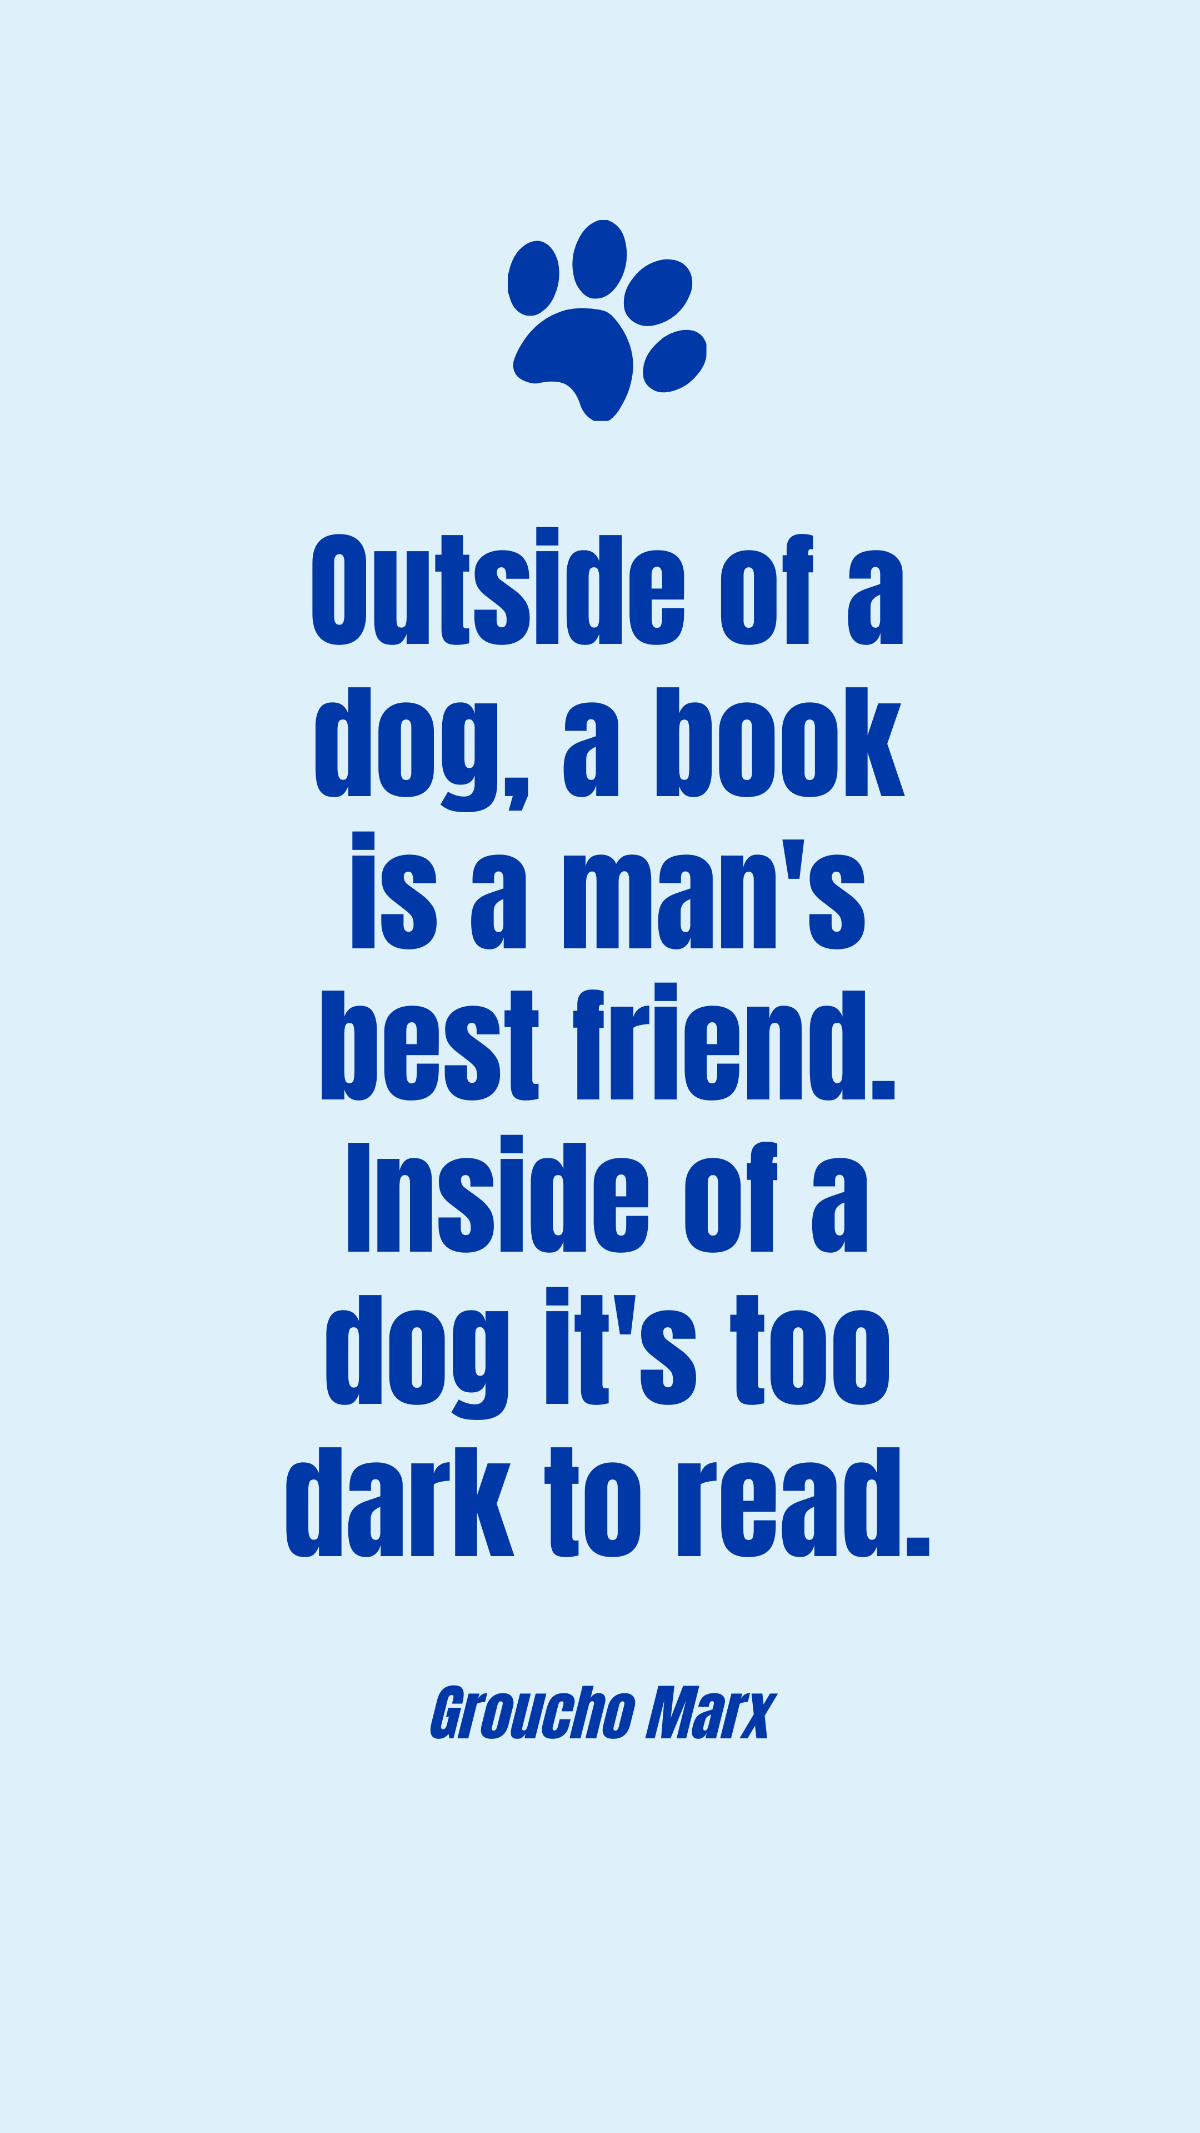 Groucho Marx - Outside of a dog, a book is a man's best friend. Inside of a dog it's too dark to read. Template